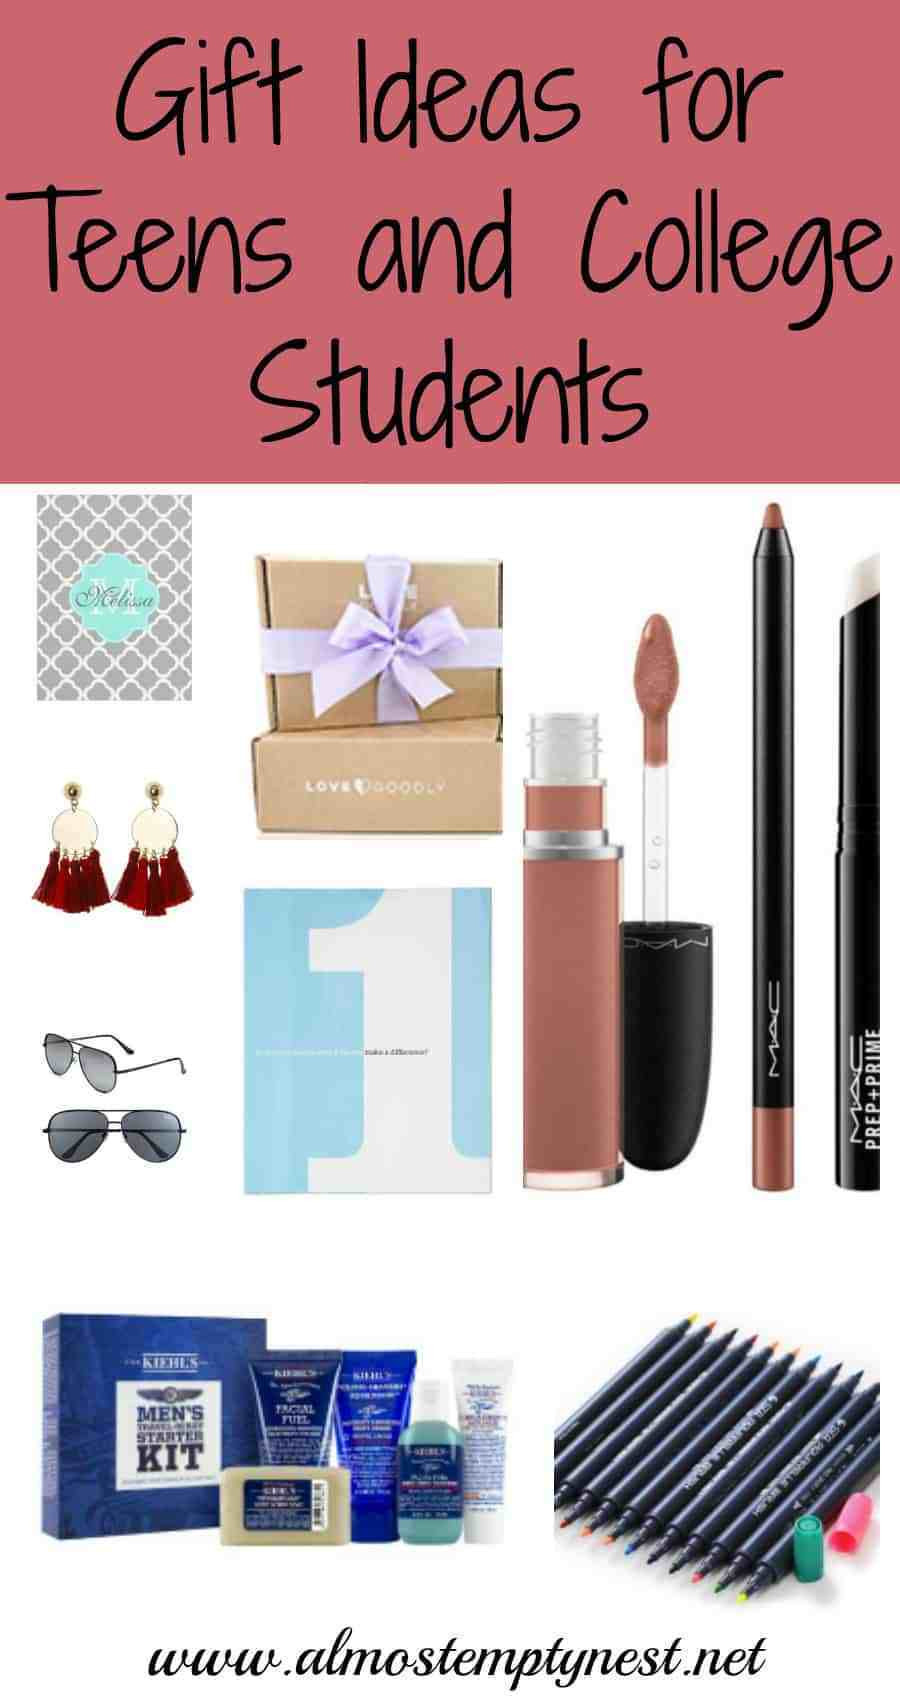 College Student Christmas Gift Ideas
 Gift Ideas for Teens and College Students Almost Empty Nest